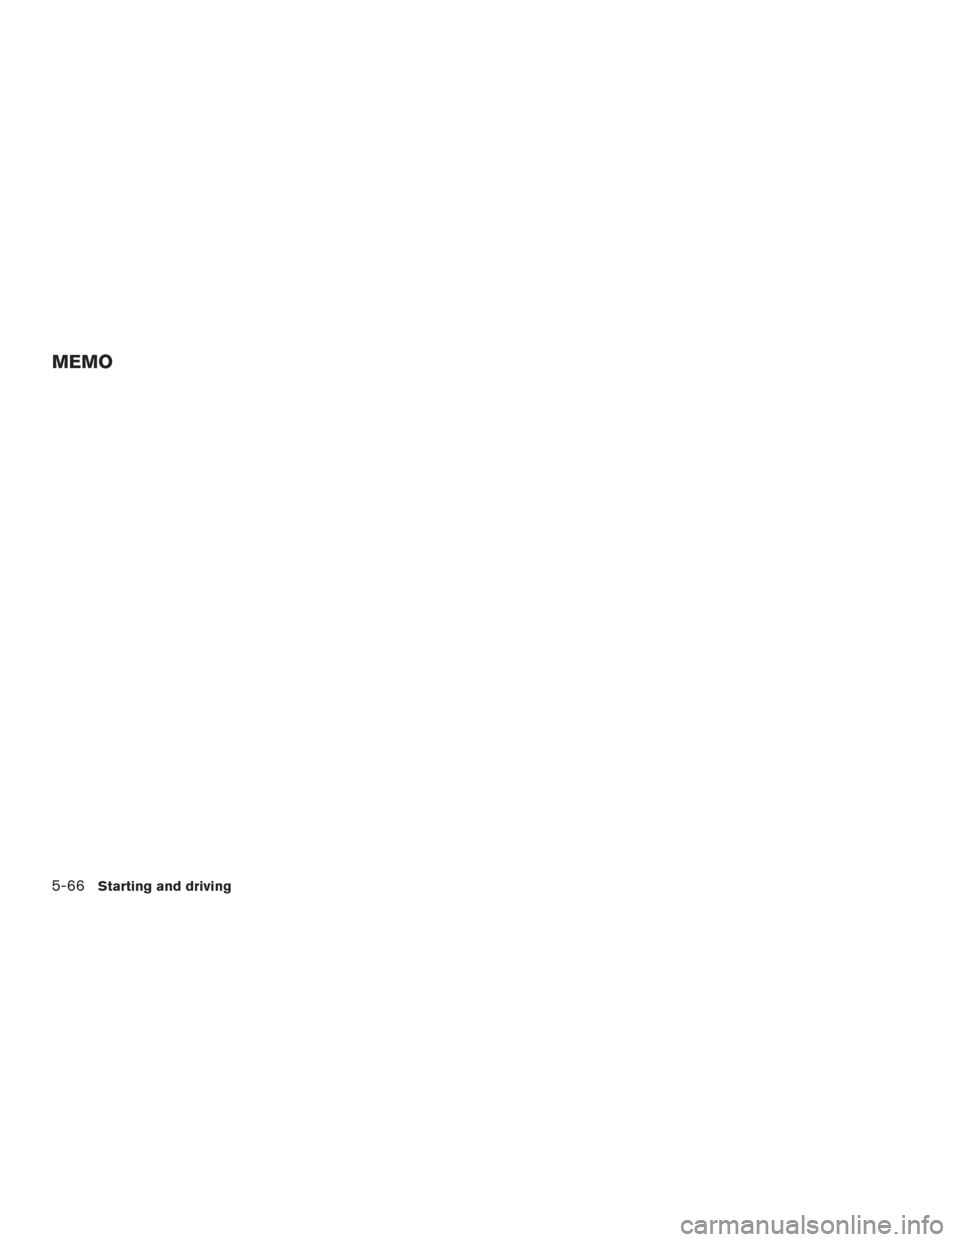 NISSAN TITAN 2016 2.G Owners Manual MEMO
5-66Starting and driving 